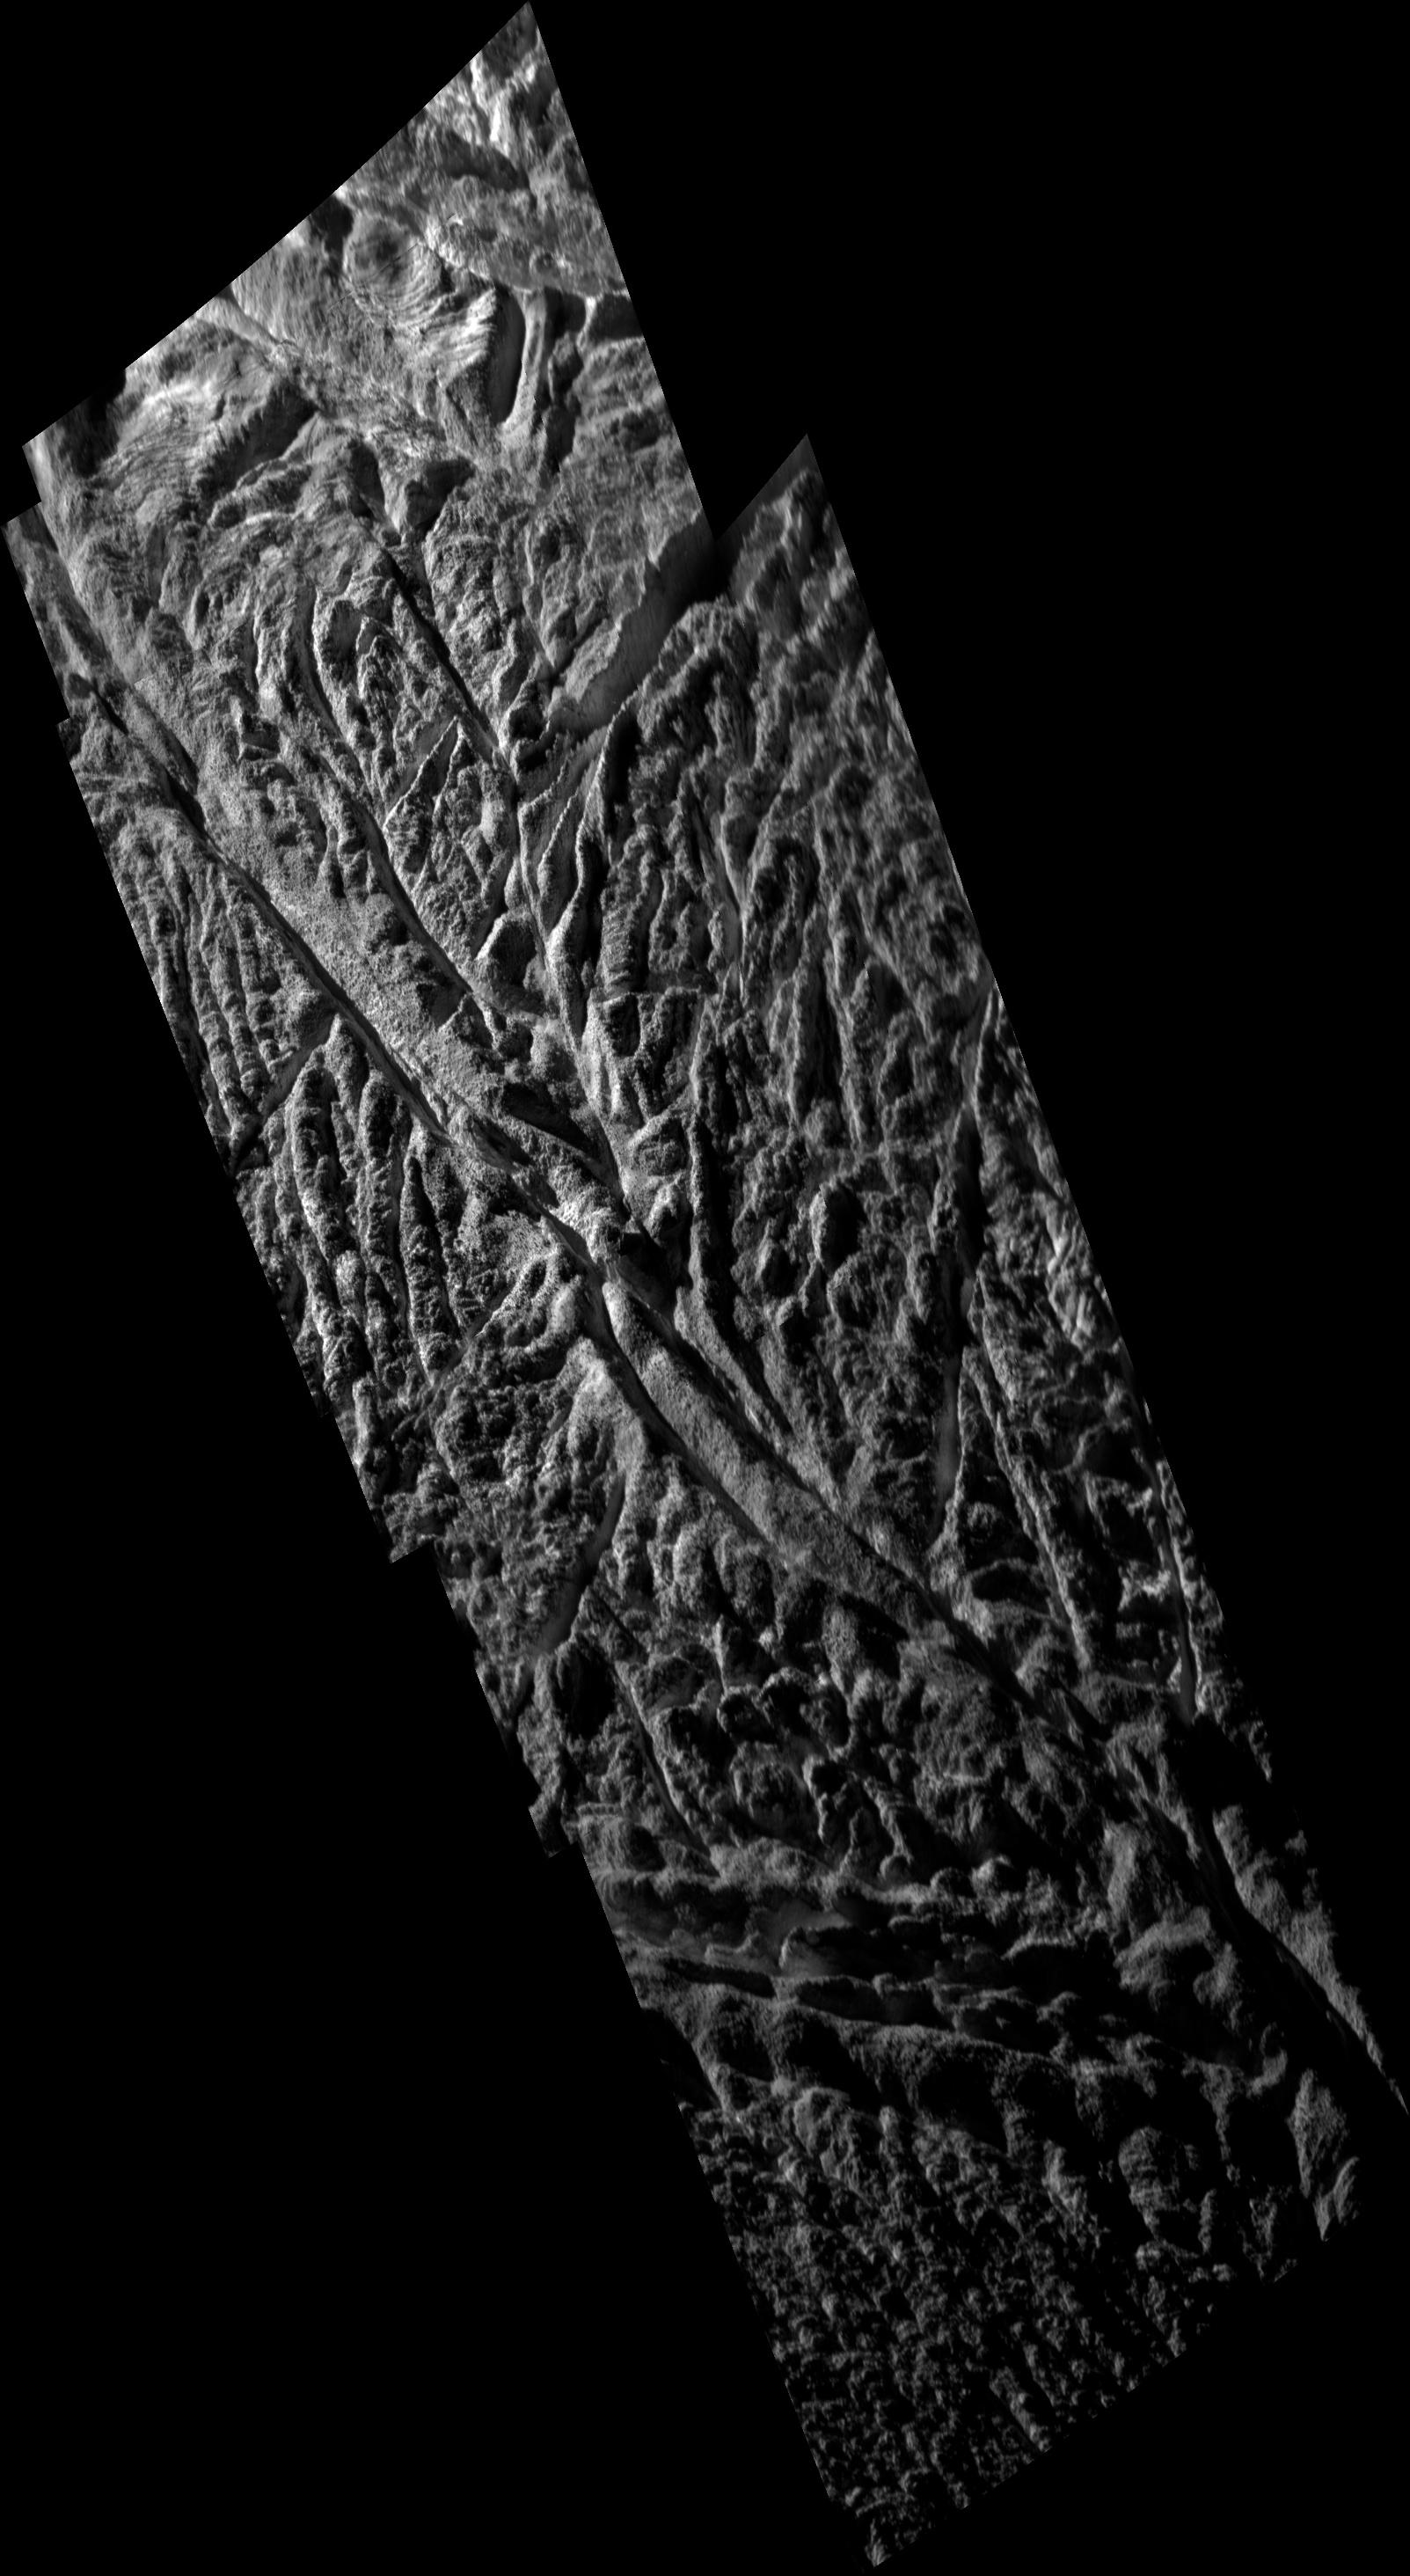 Mosaic image of Enceladus from high-resolution data from the imaging science subsystem aboard NASA’s Cassini spacecraft,